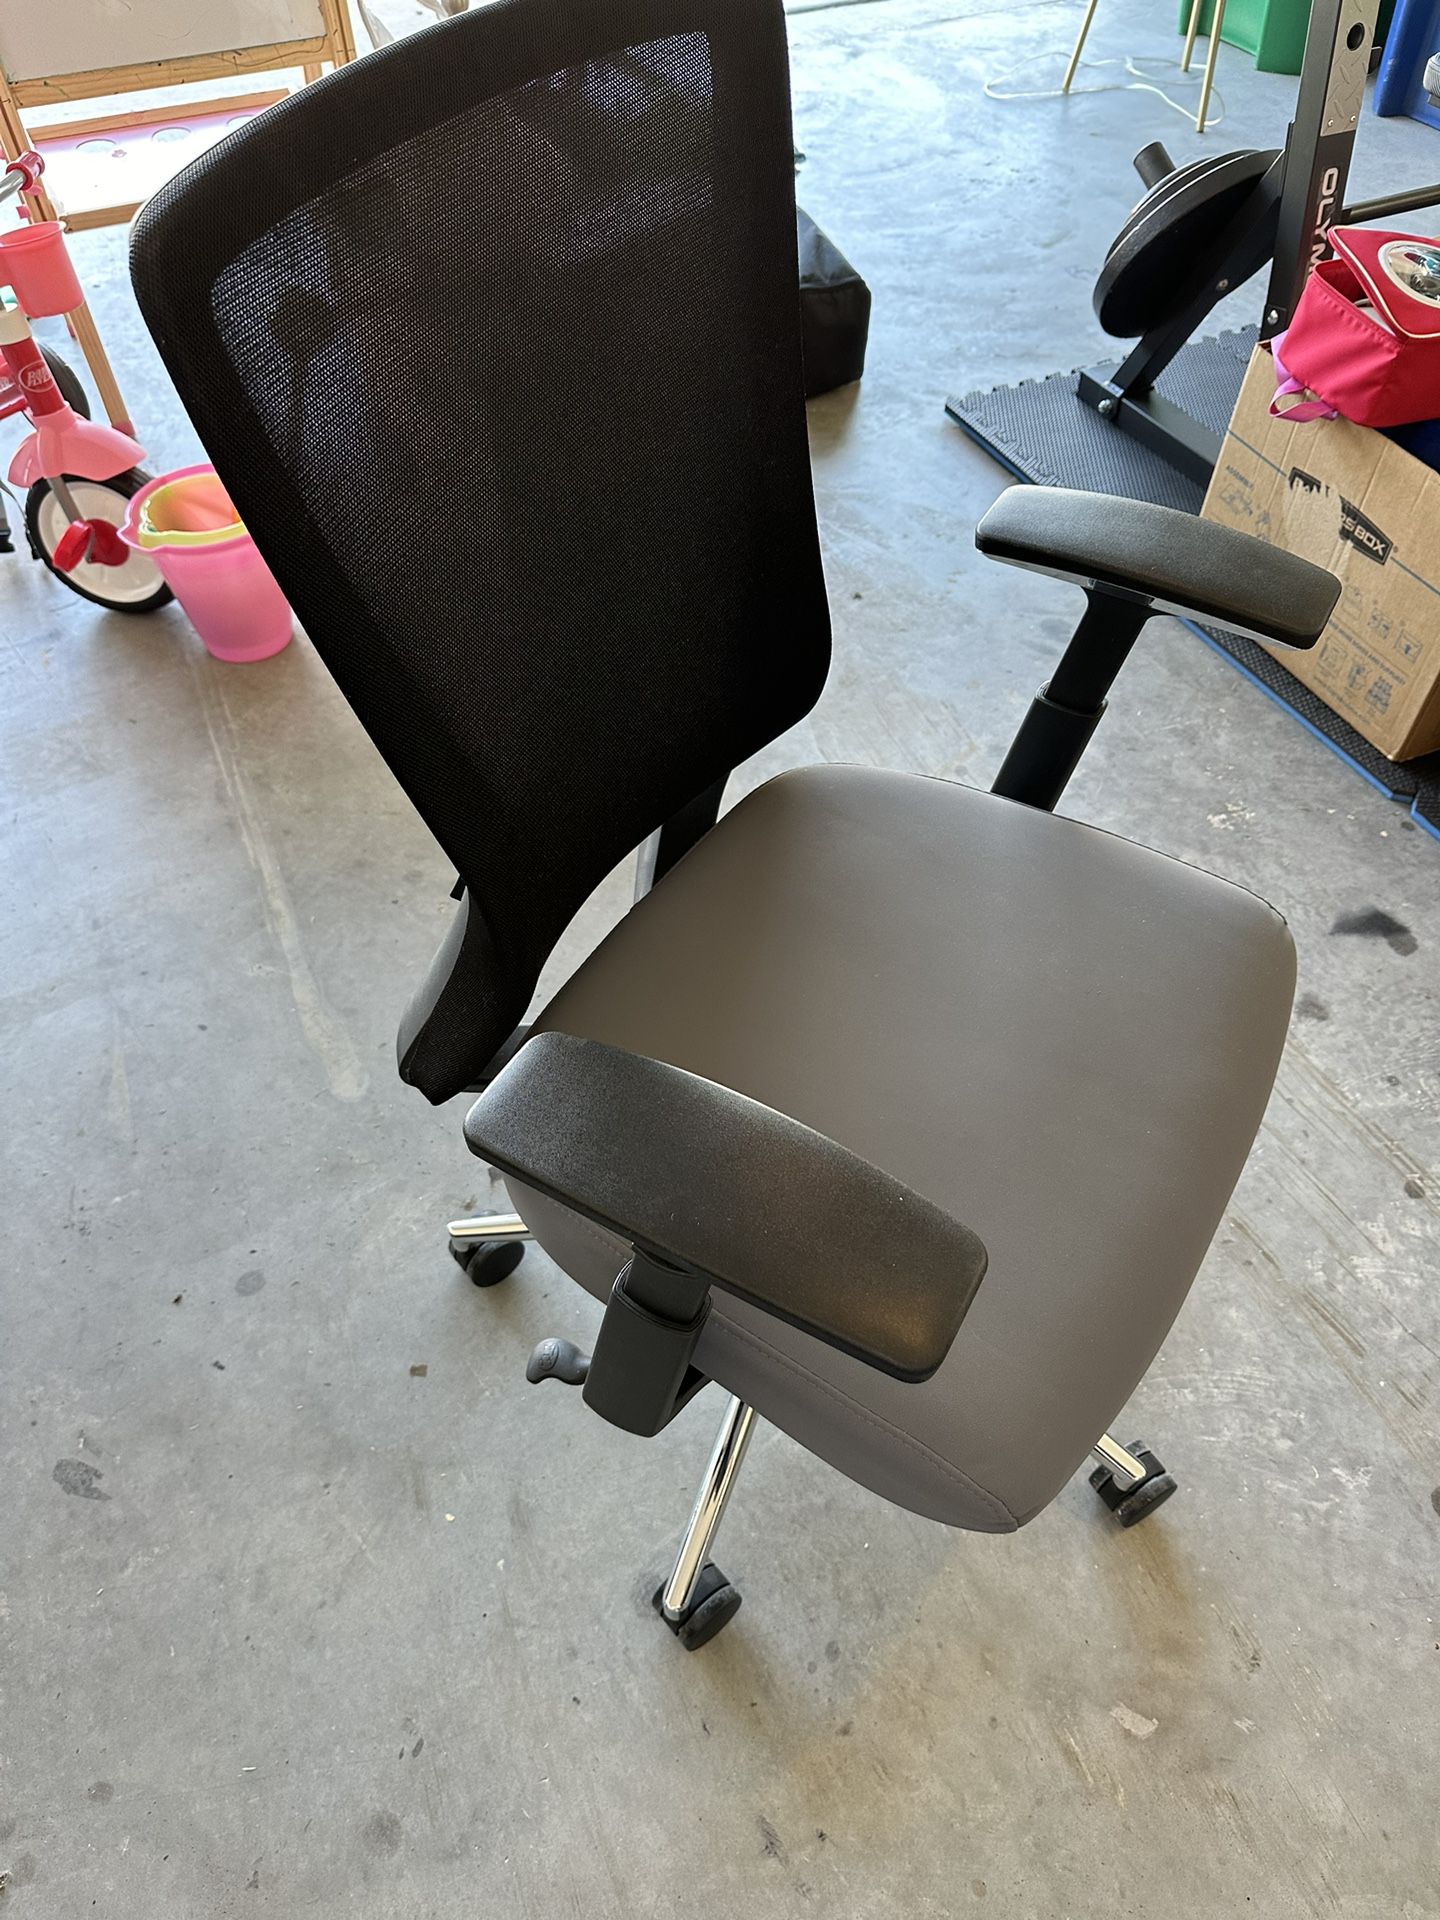 High Quality Office Chair 